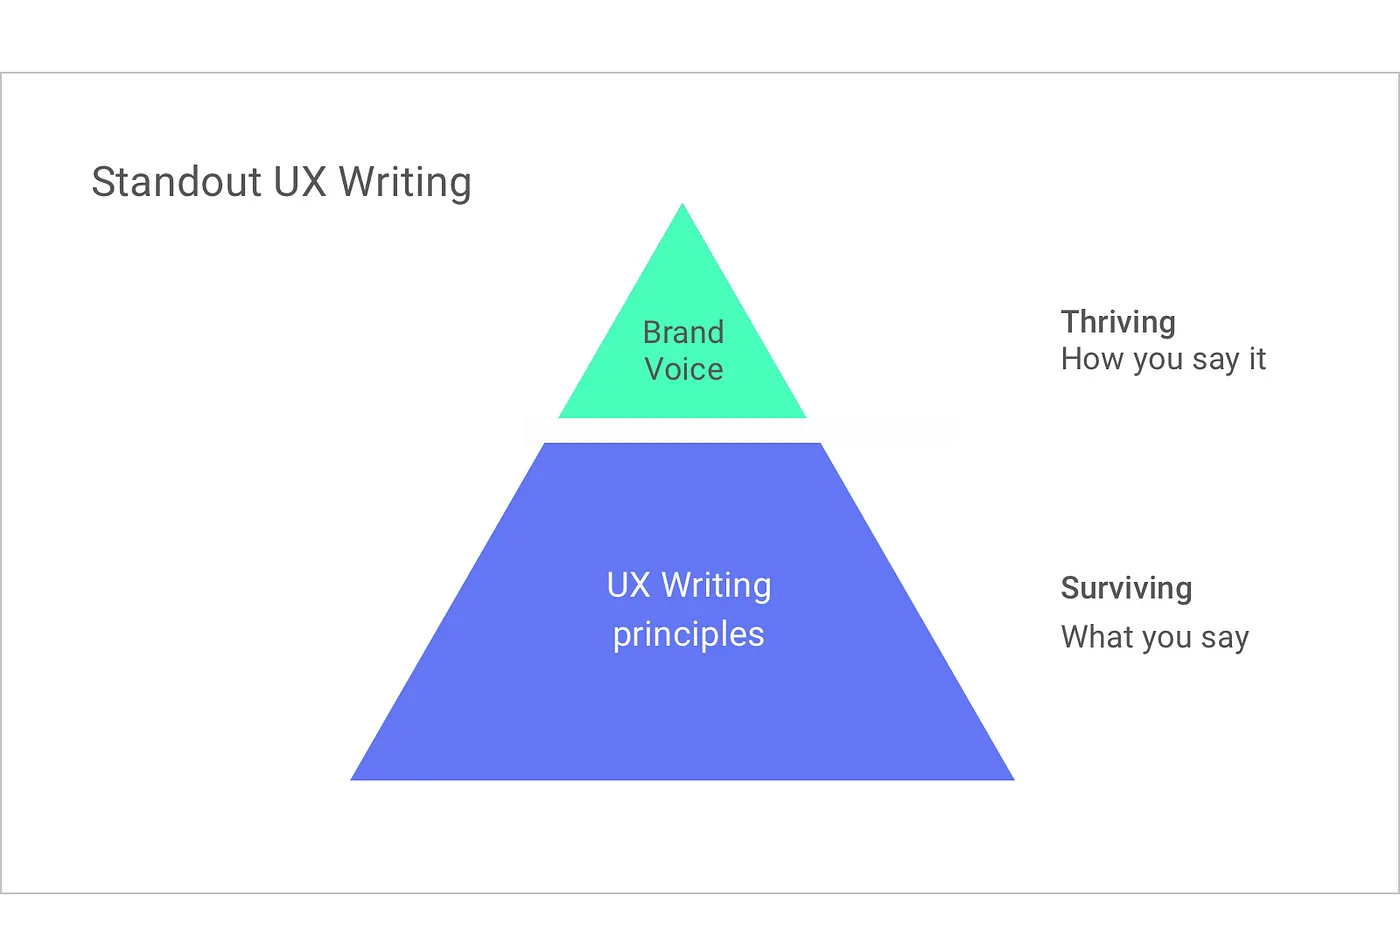 What is standout UX writing